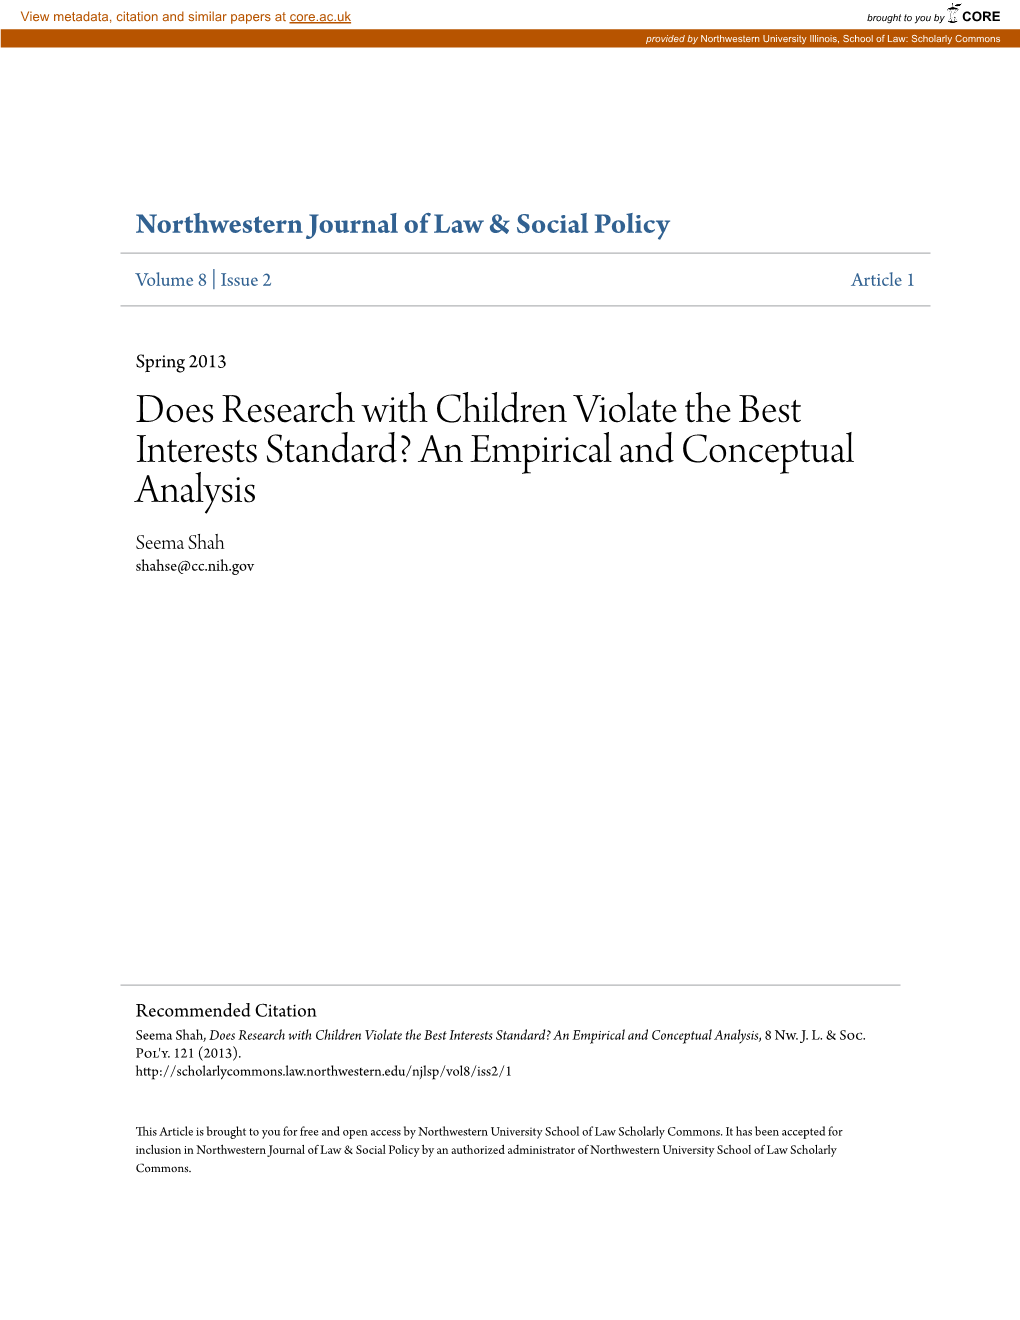 Does Research with Children Violate the Best Interests Standard? an Empirical and Conceptual Analysis Seema Shah Shahse@Cc.Nih.Gov